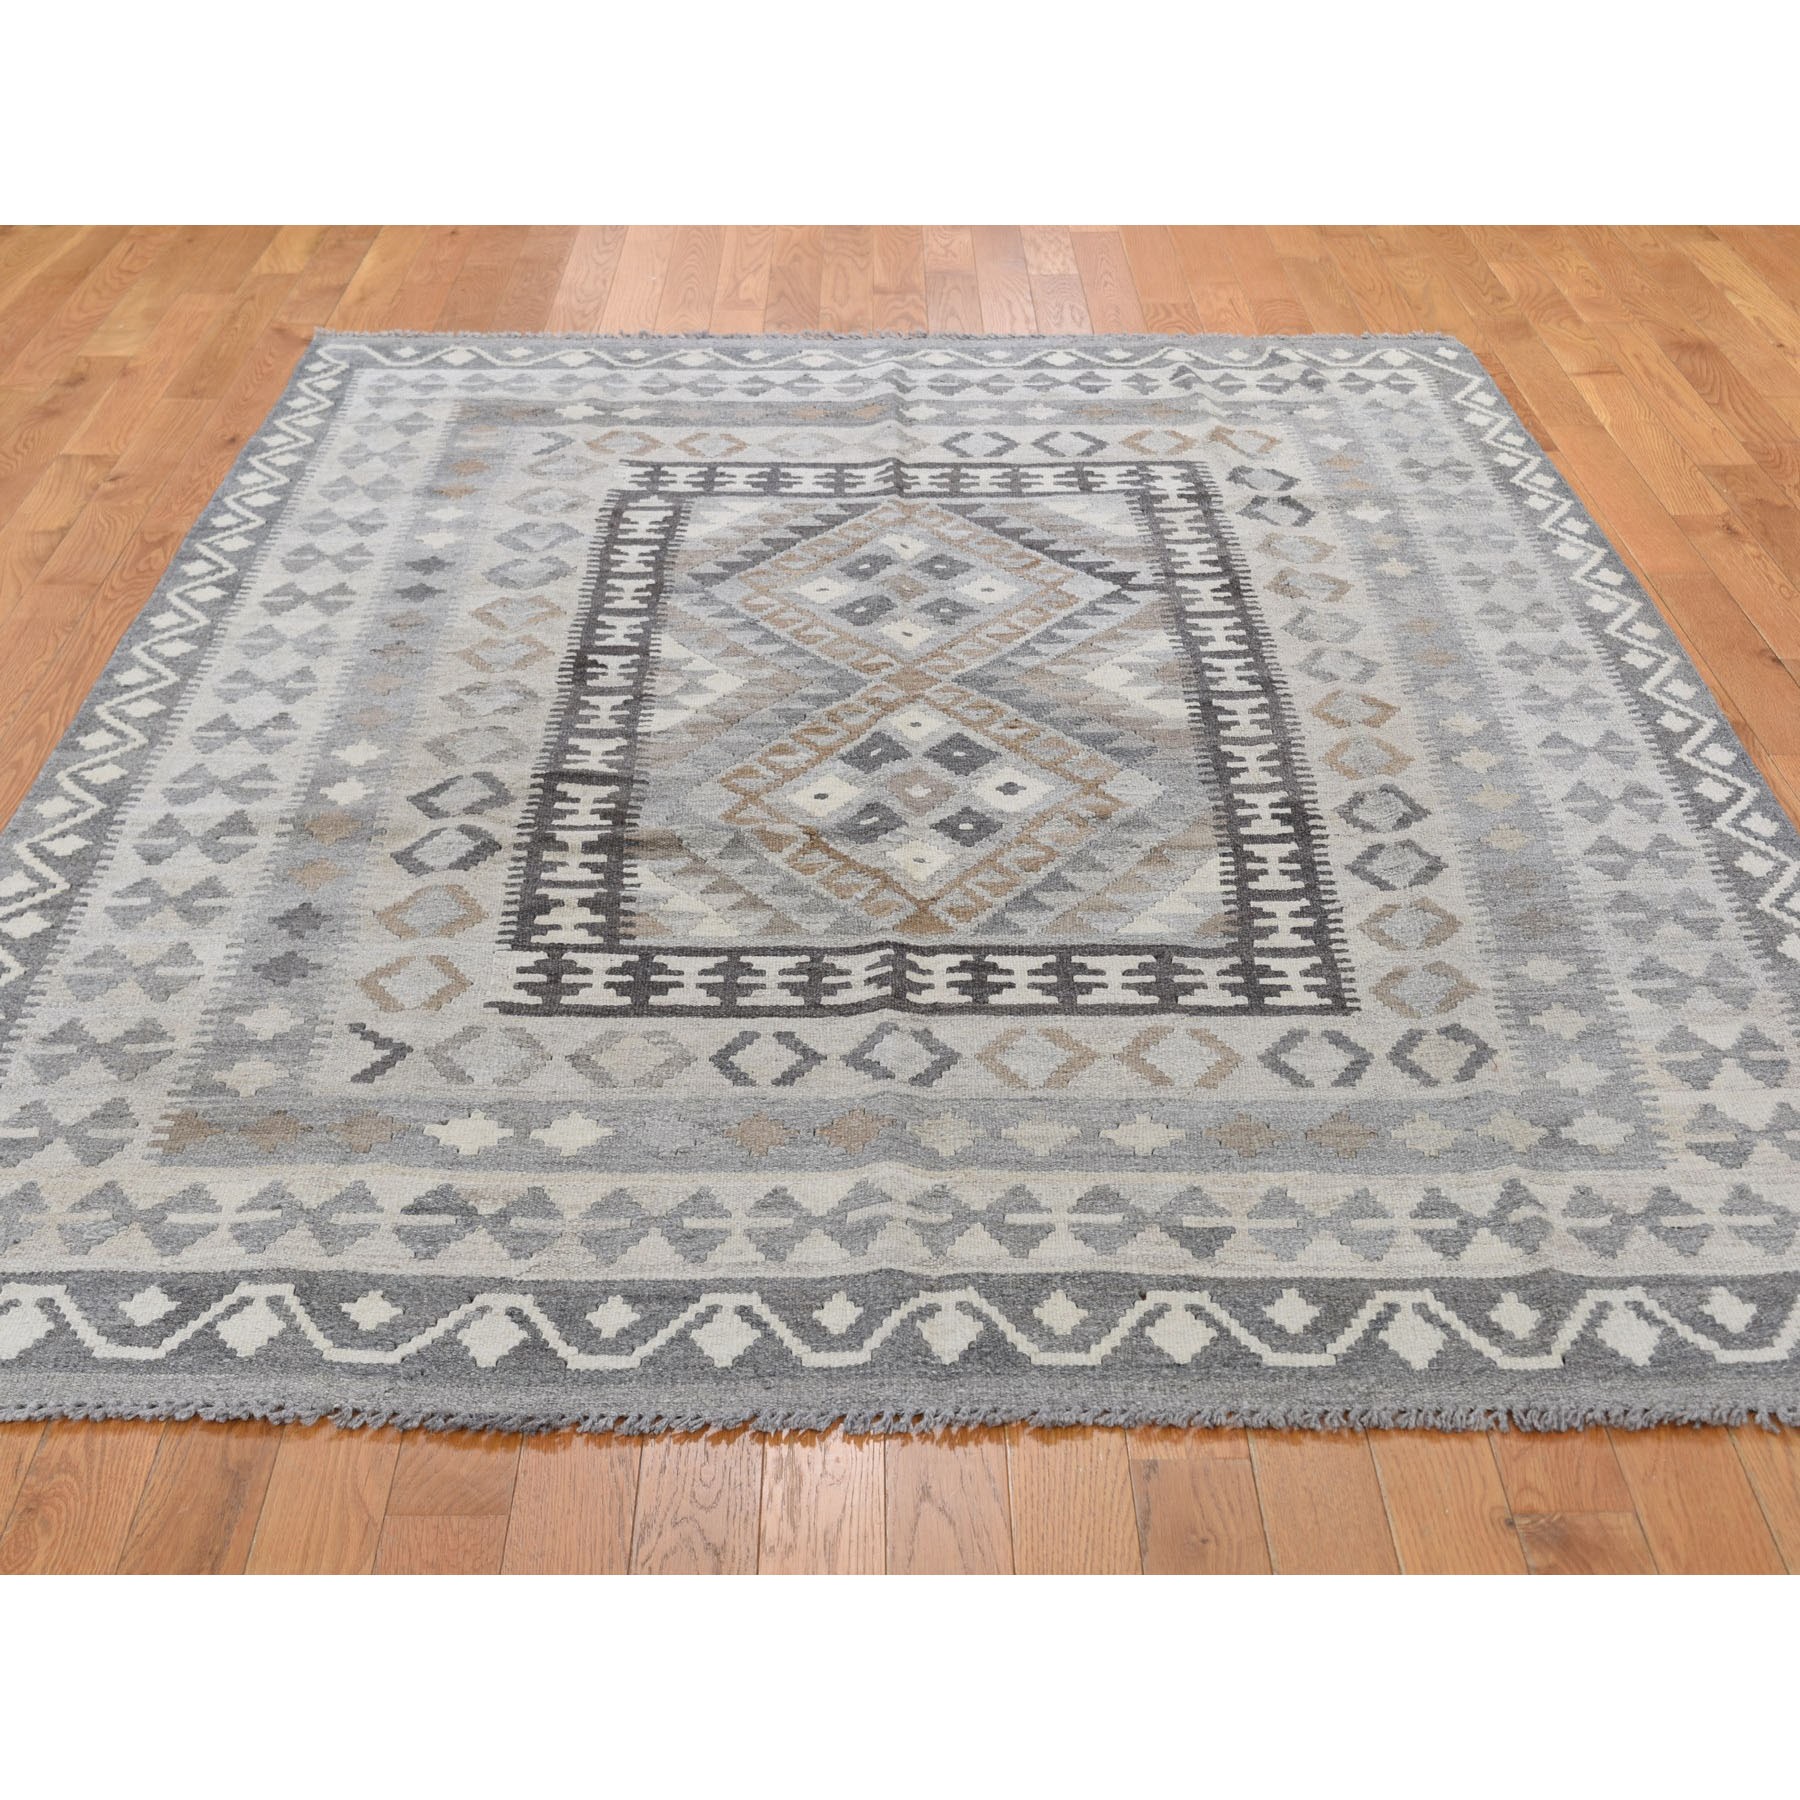 5-8 x8-1   Undyed Natural Wool Afghan Kilim Reversible Hand Woven Oriental Rug 